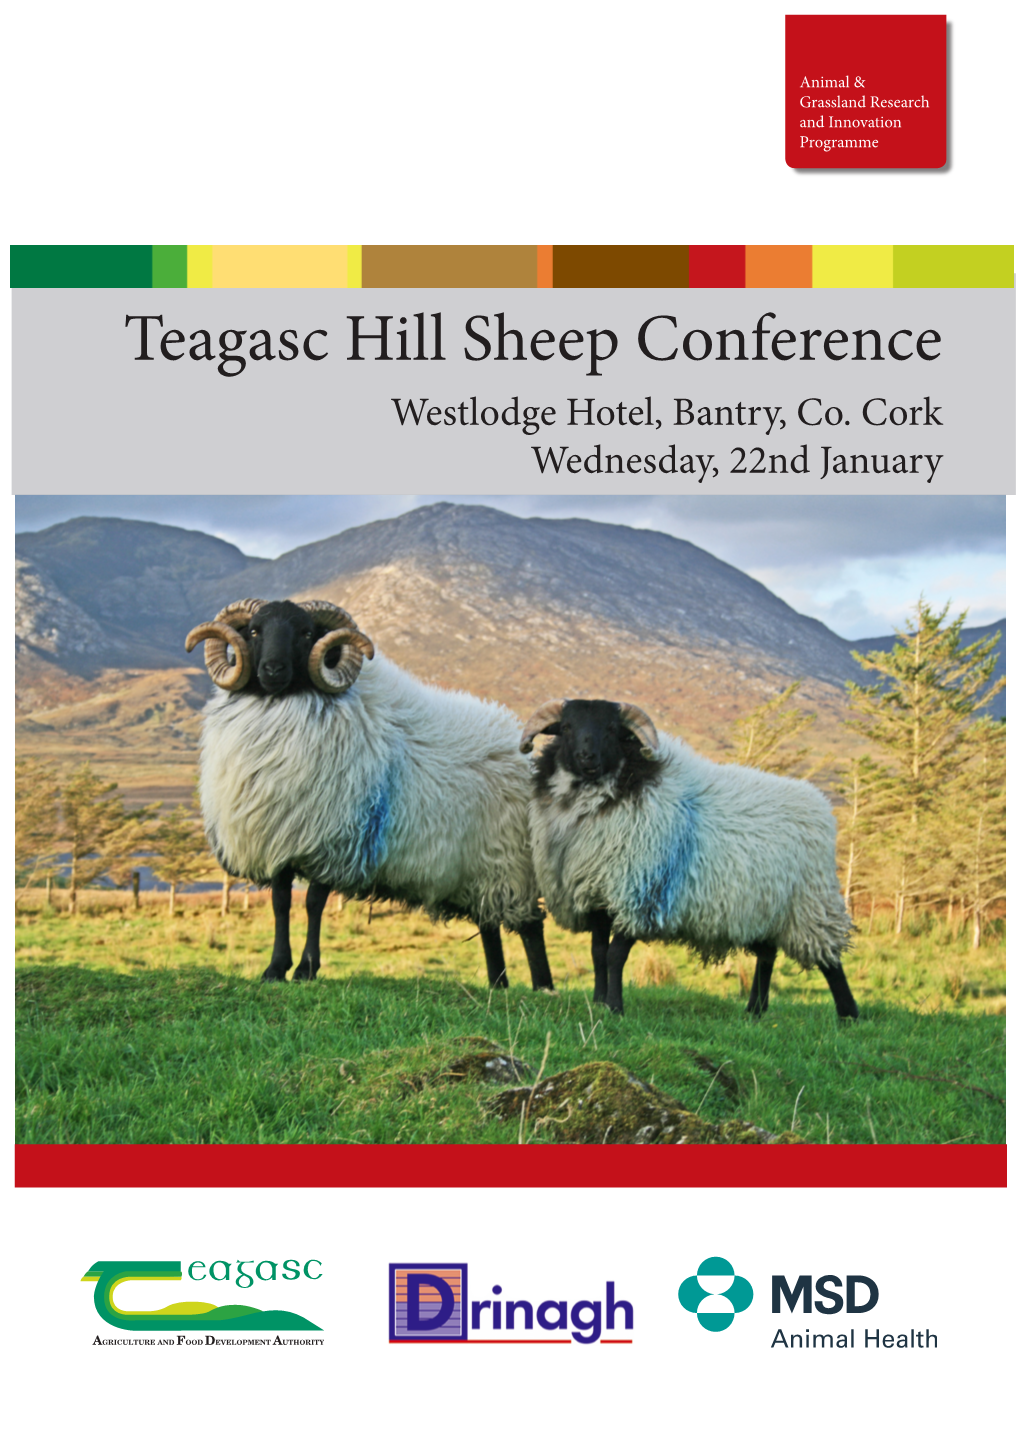 Teagasc Hill Sheep Conference Westlodge Hotel, Bantry, Co